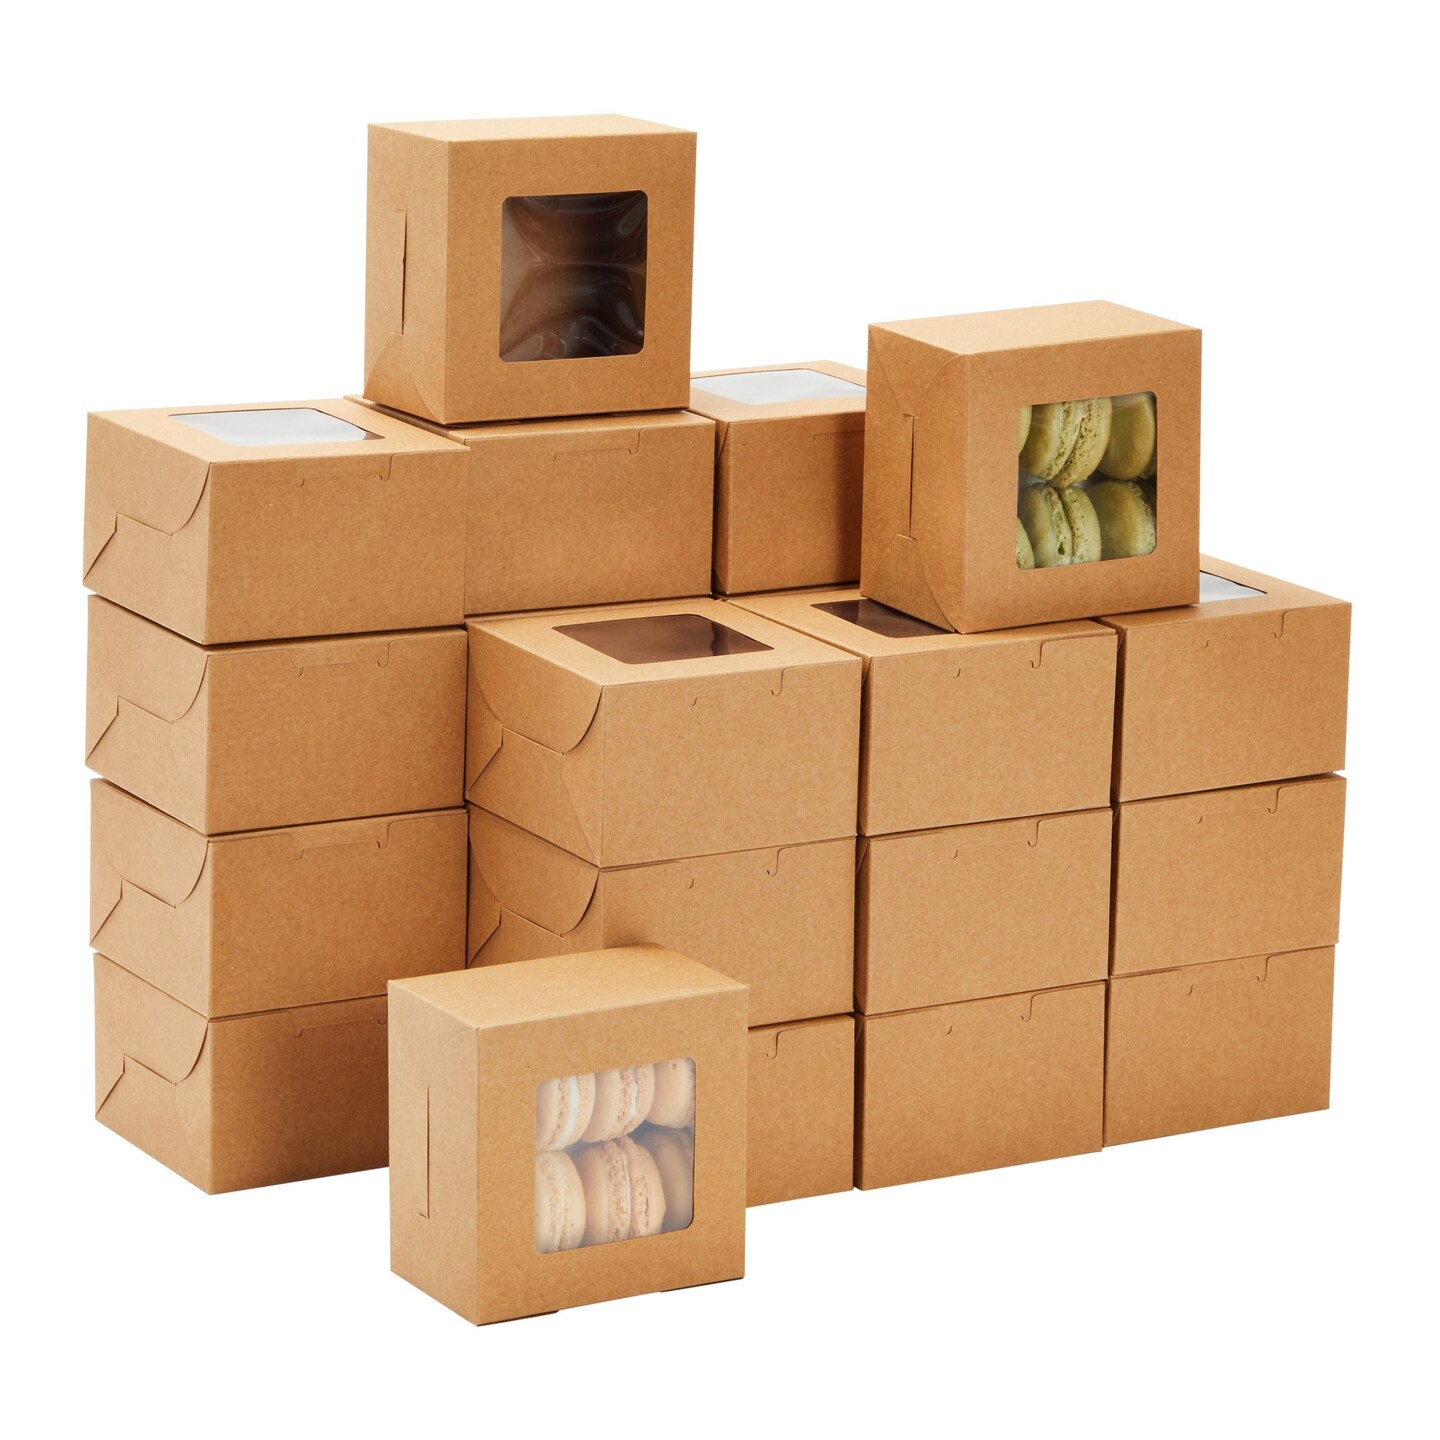 50 Pack 4x4x2 Mini Dessert Boxes with Window for Bakery - Baked Goods Packaging Containers for Cupcakes, Cookies, Pastry (Kraft Paper)